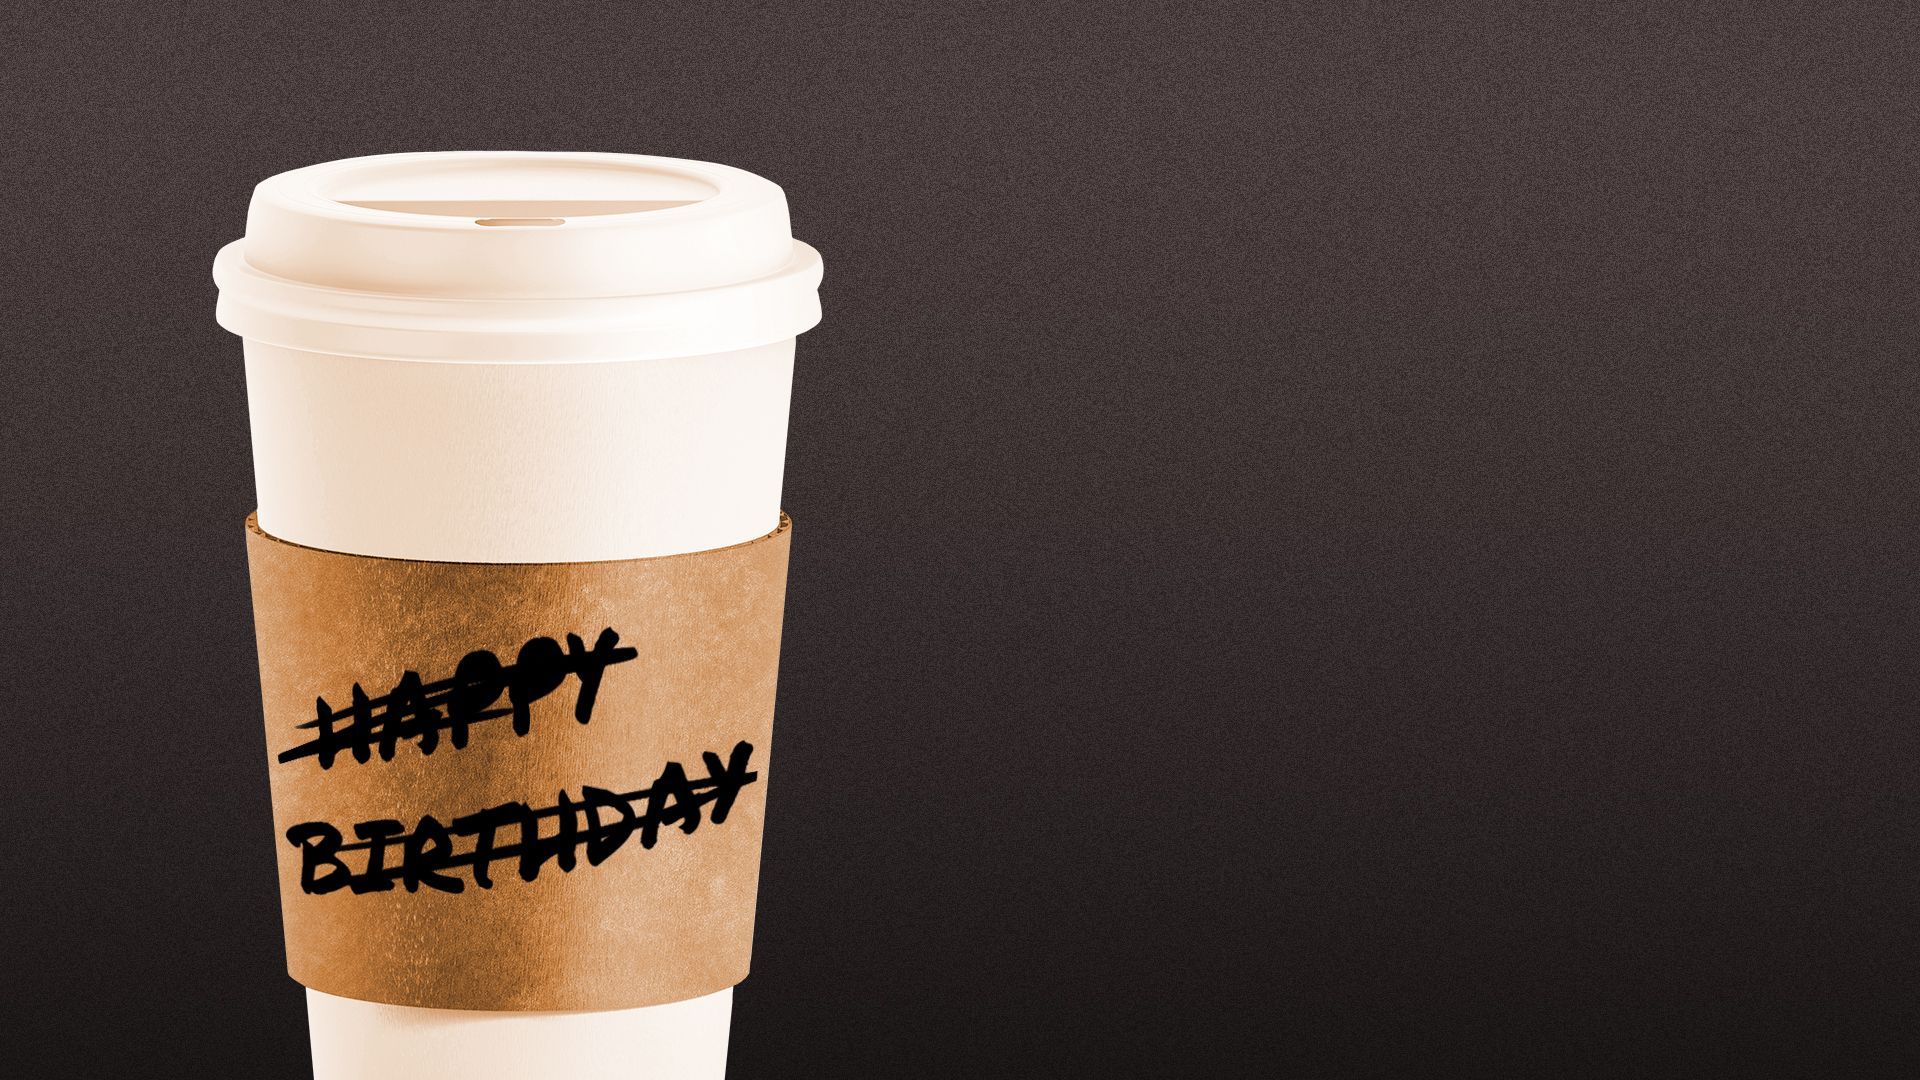 Illustration of a coffee cup with "Happy Birthday" written and scribbled out on the sleeve.